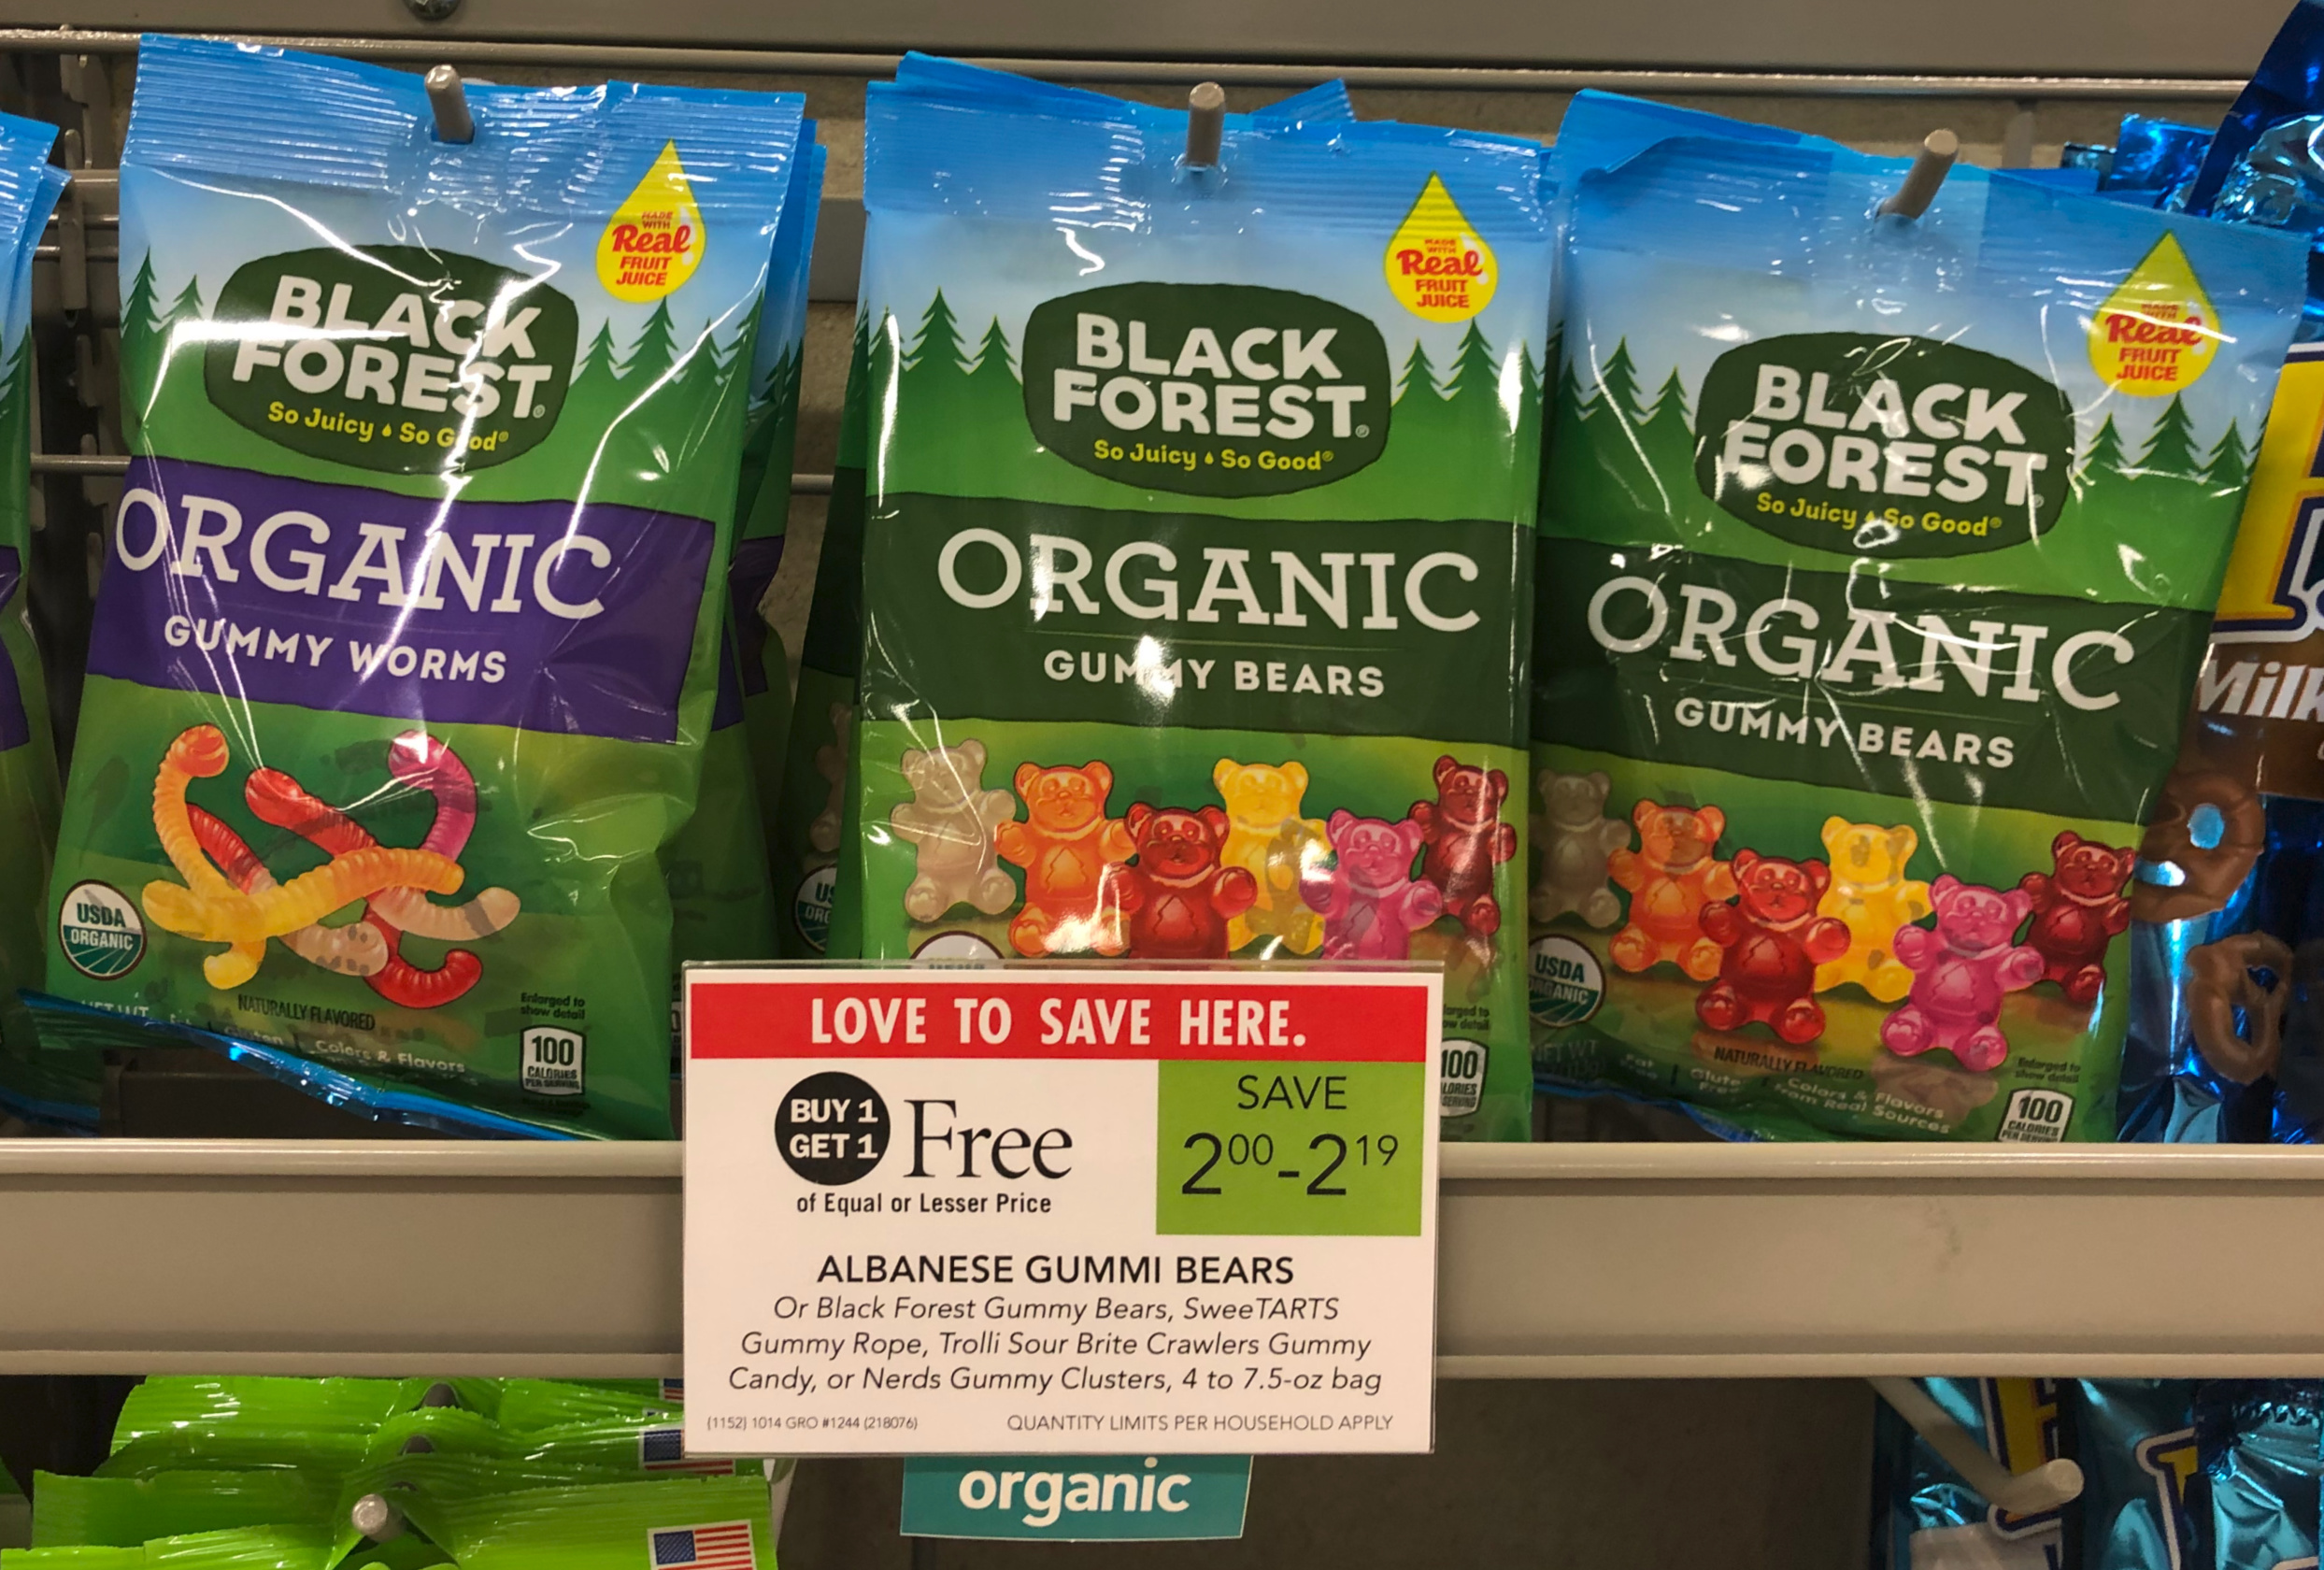 Black Forest Organic Gummies As Low As 75¢ At Publix on I Heart Publix